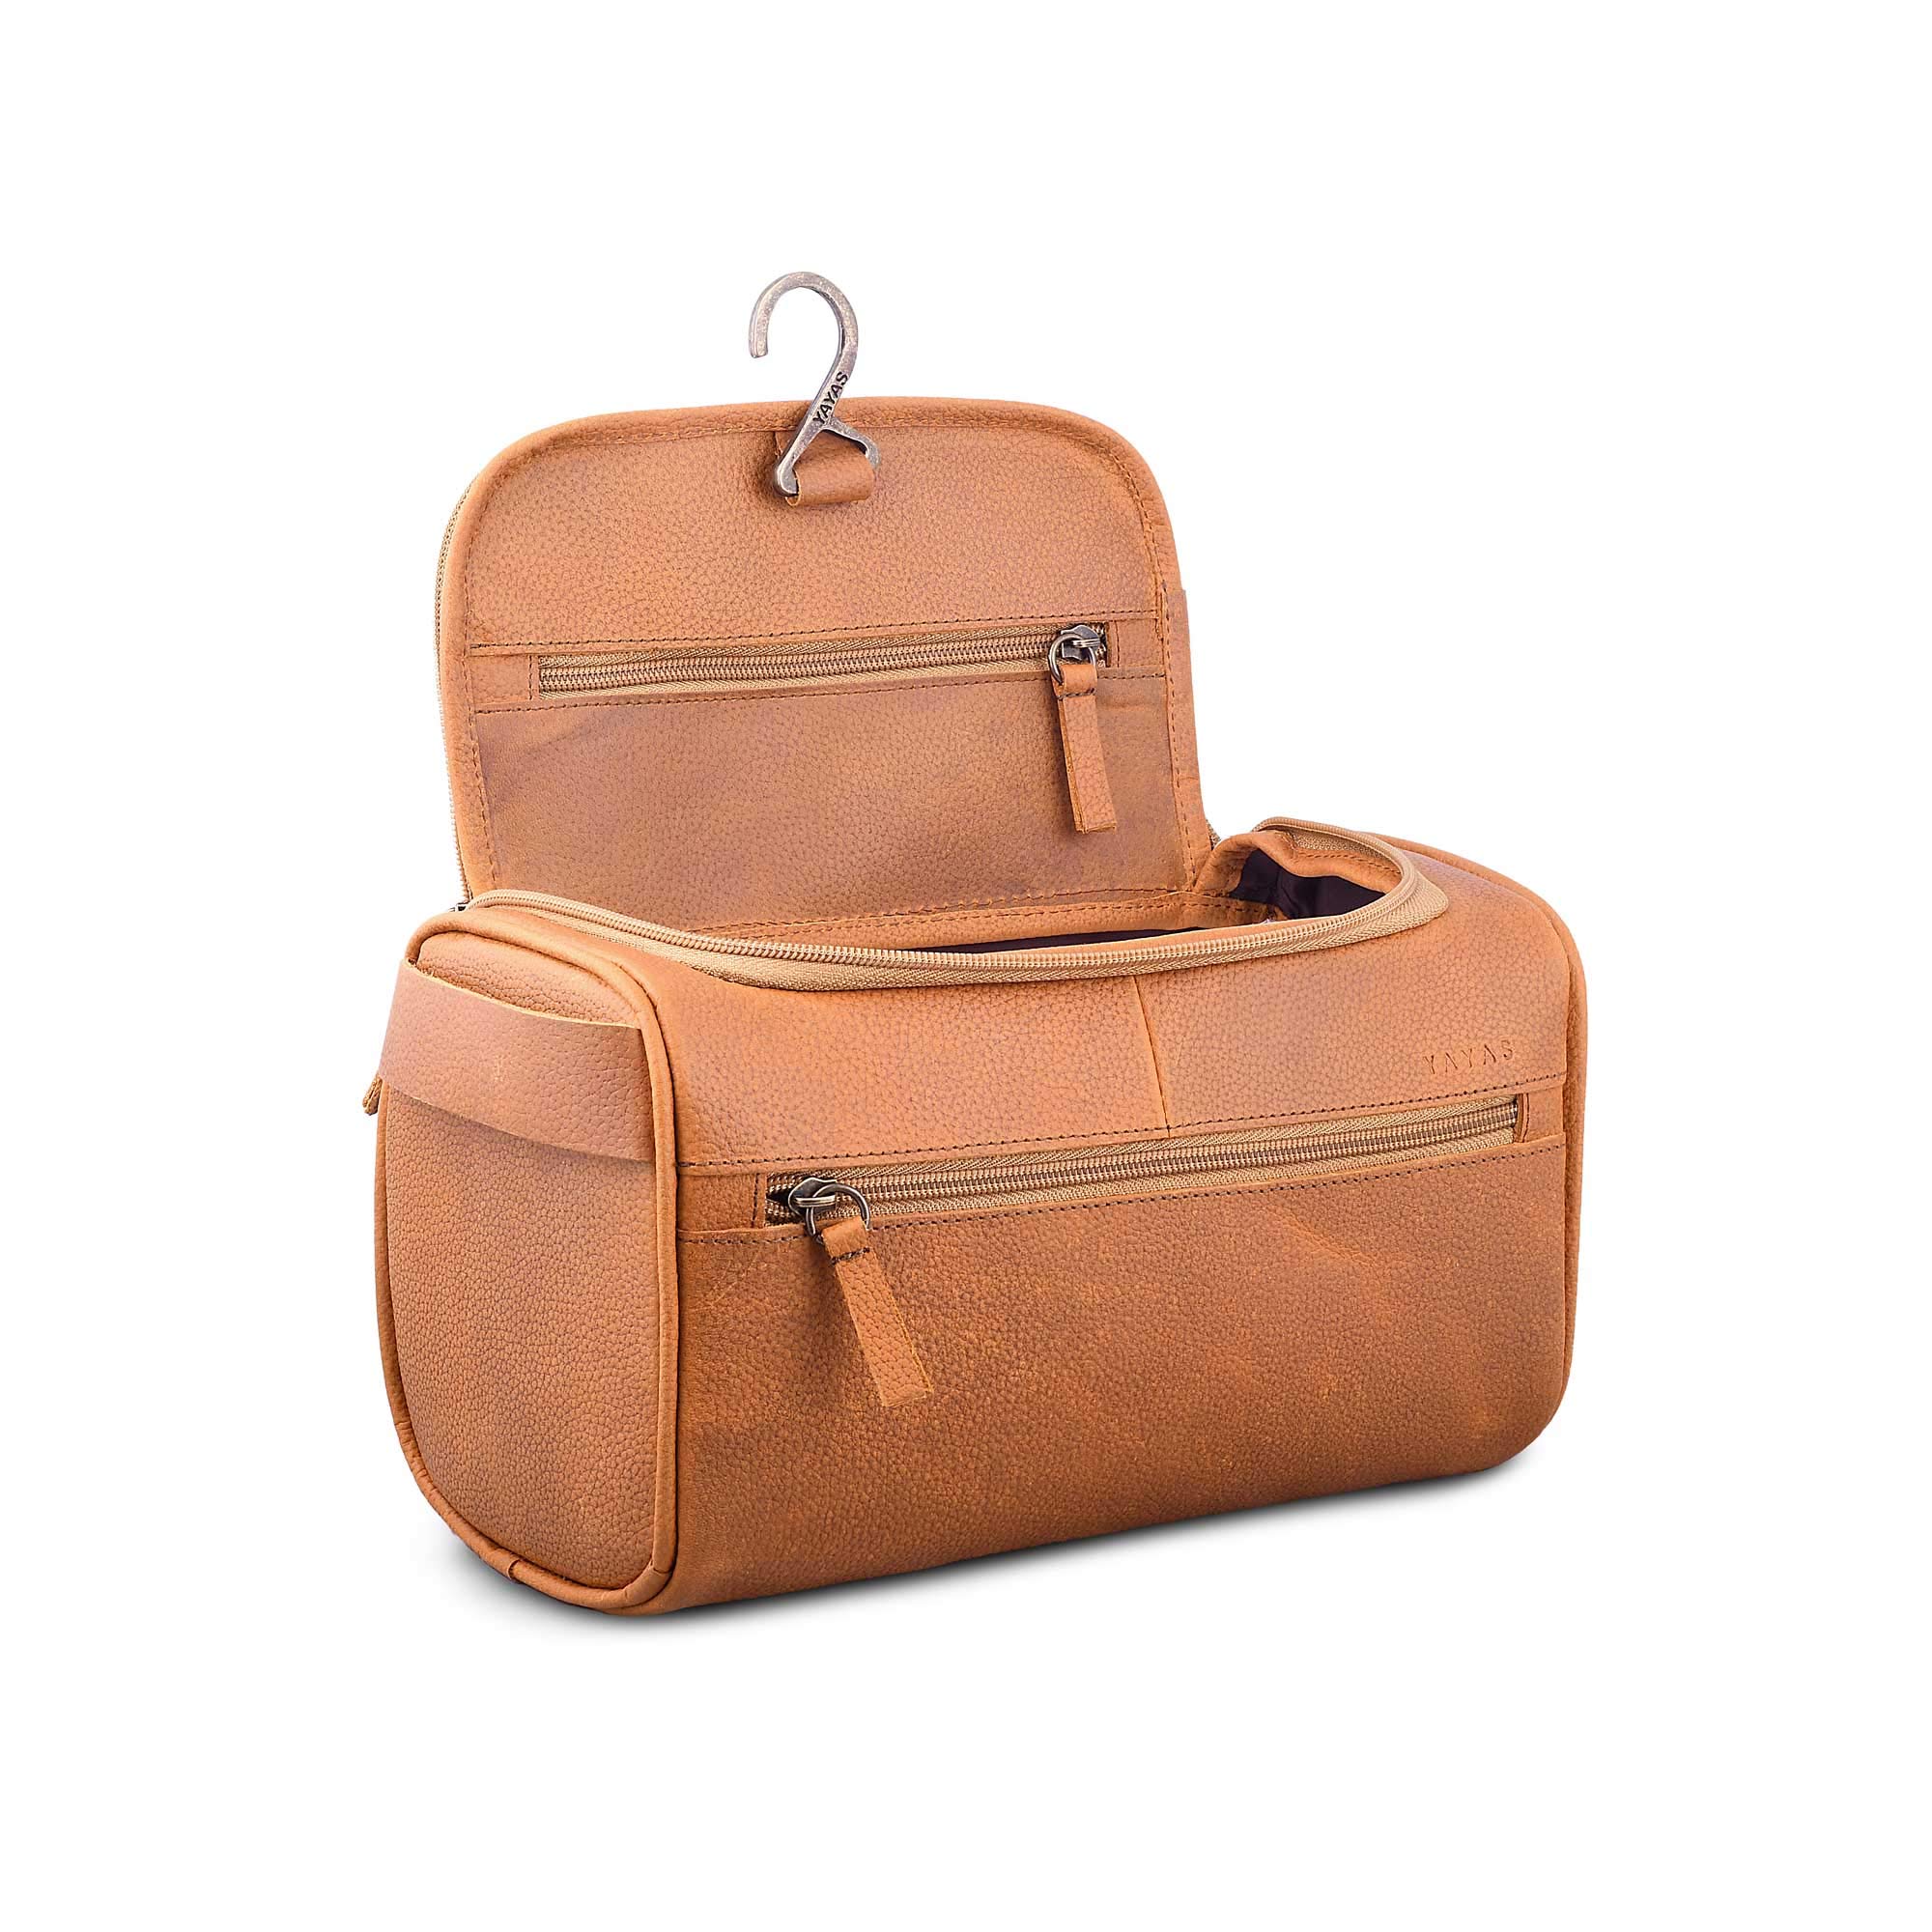 YAYAS Leather Light Brown Hanging Travel Toiletry Bag for Men and Women Large Toiletry Organizer Hygiene Bag with Metal Swivel Hook,Durable Zippers...